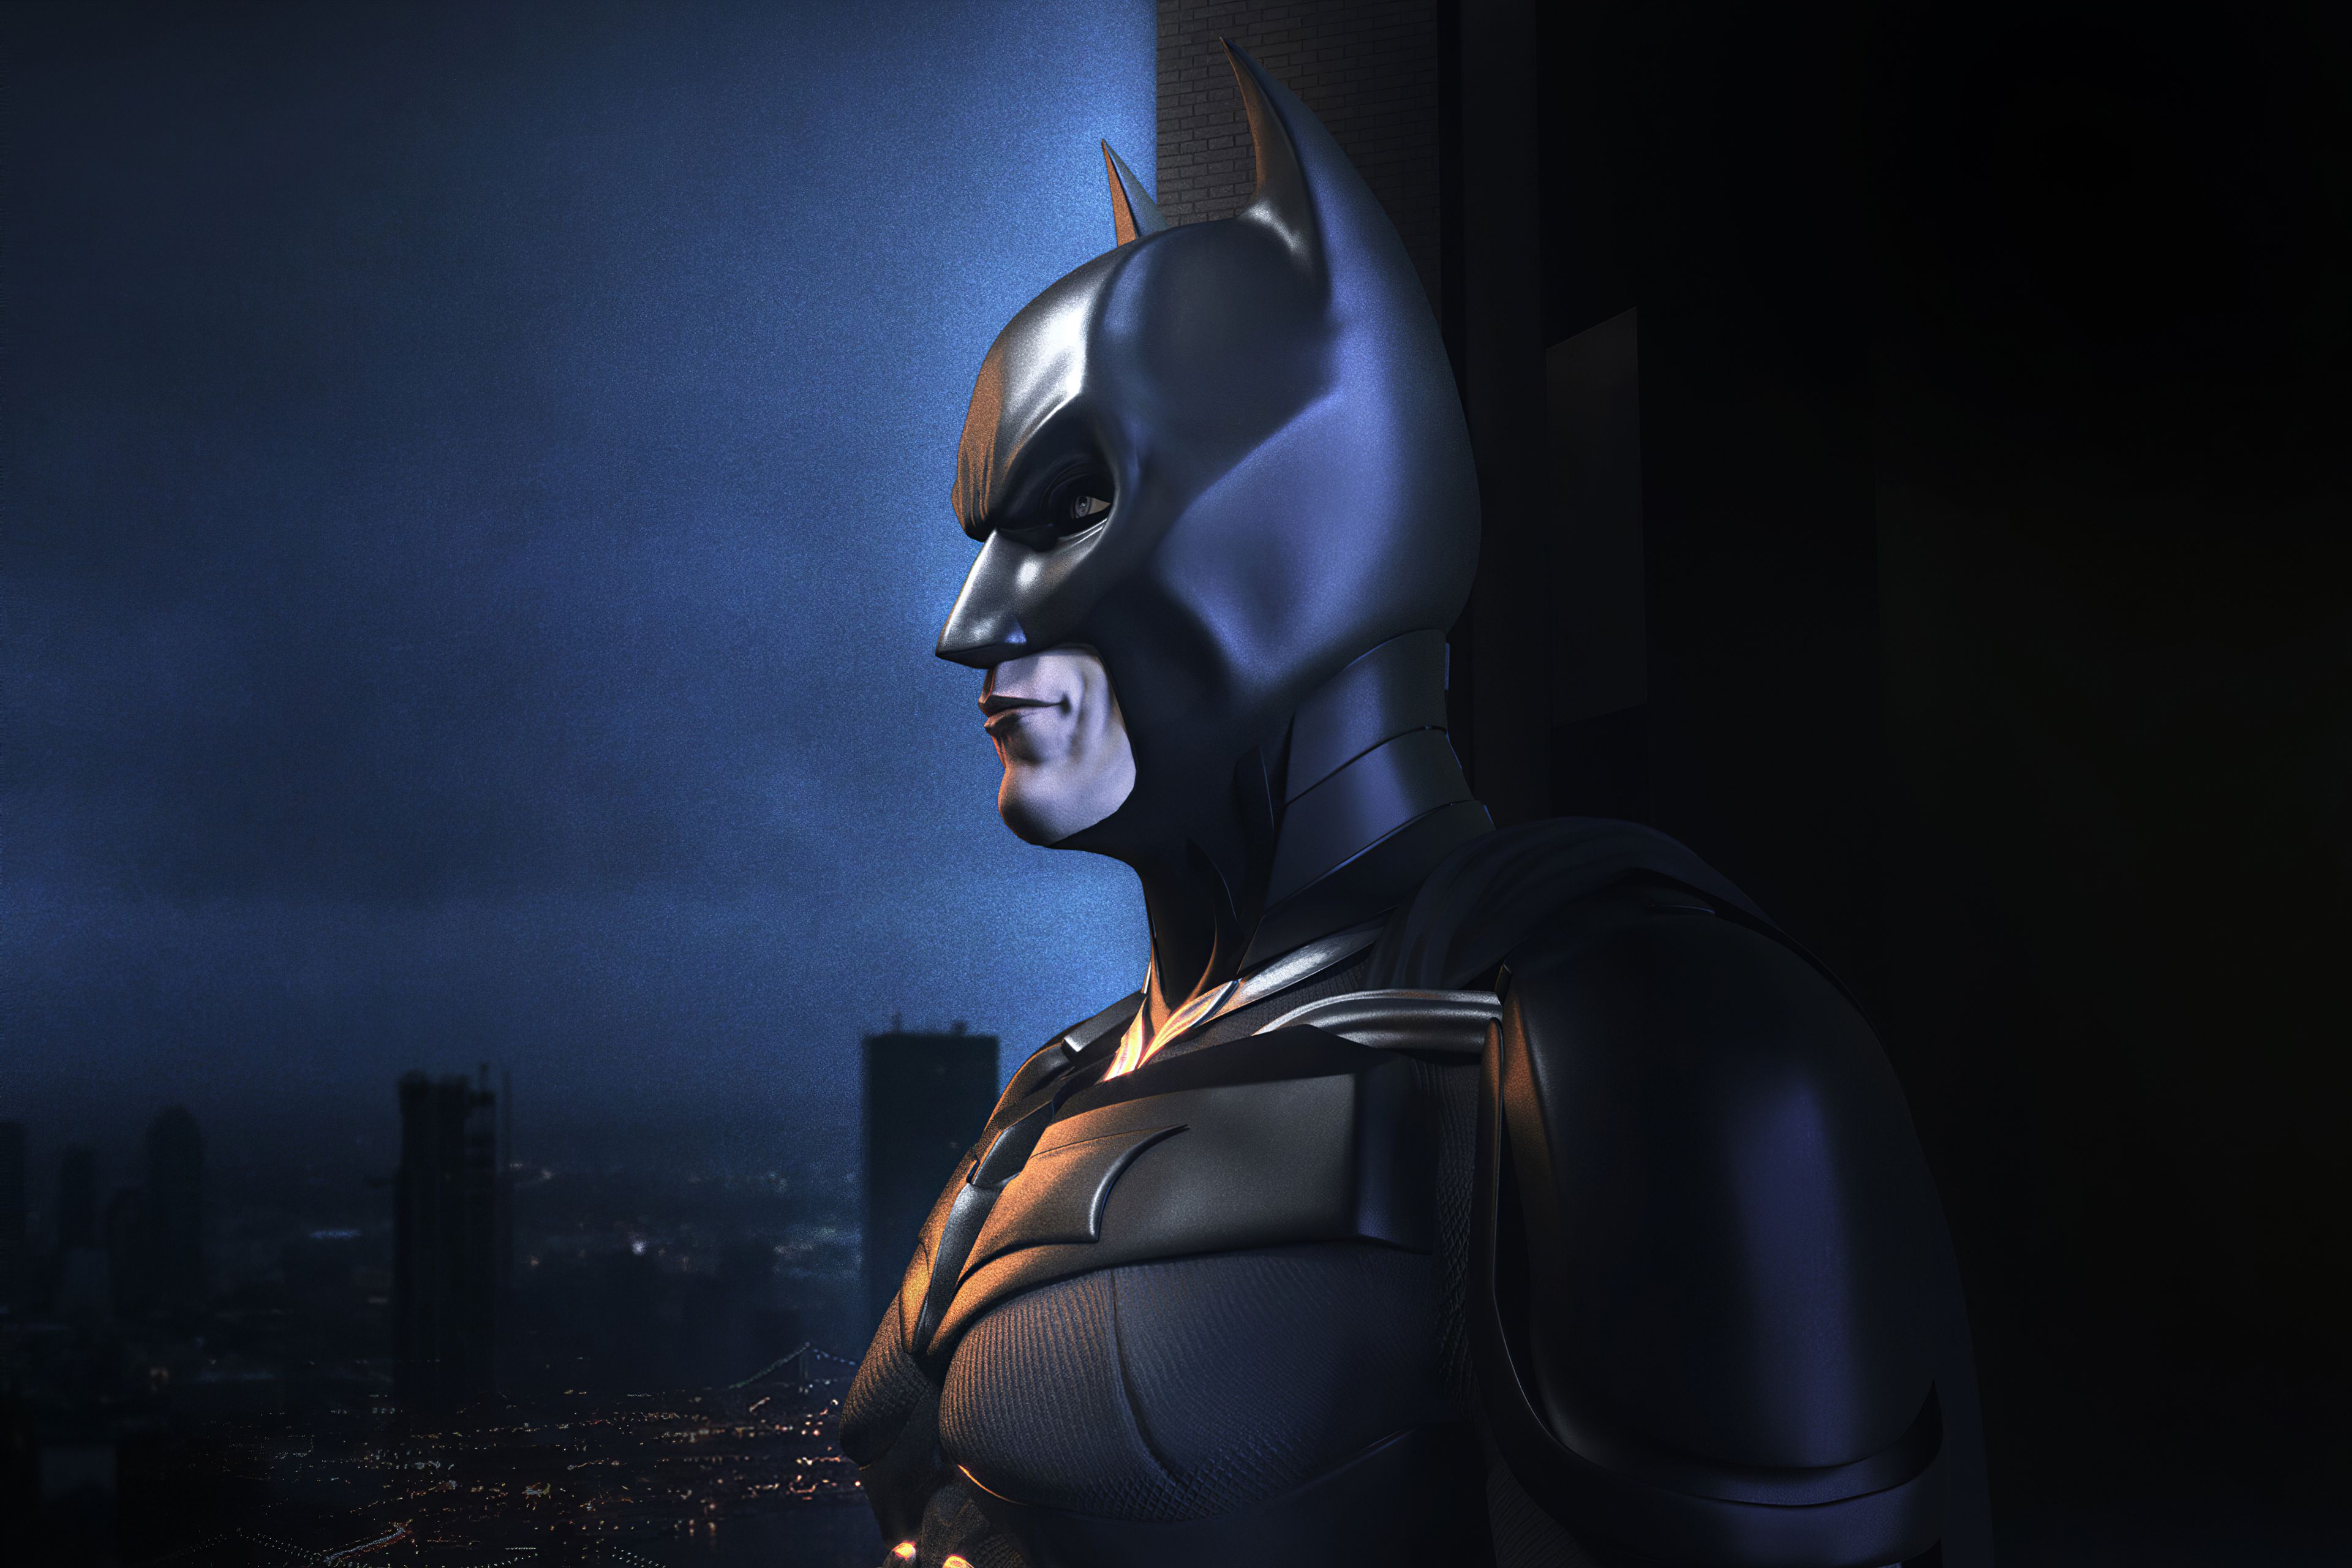 Batman 4K wallpaper for your desktop or mobile screen free and easy to download